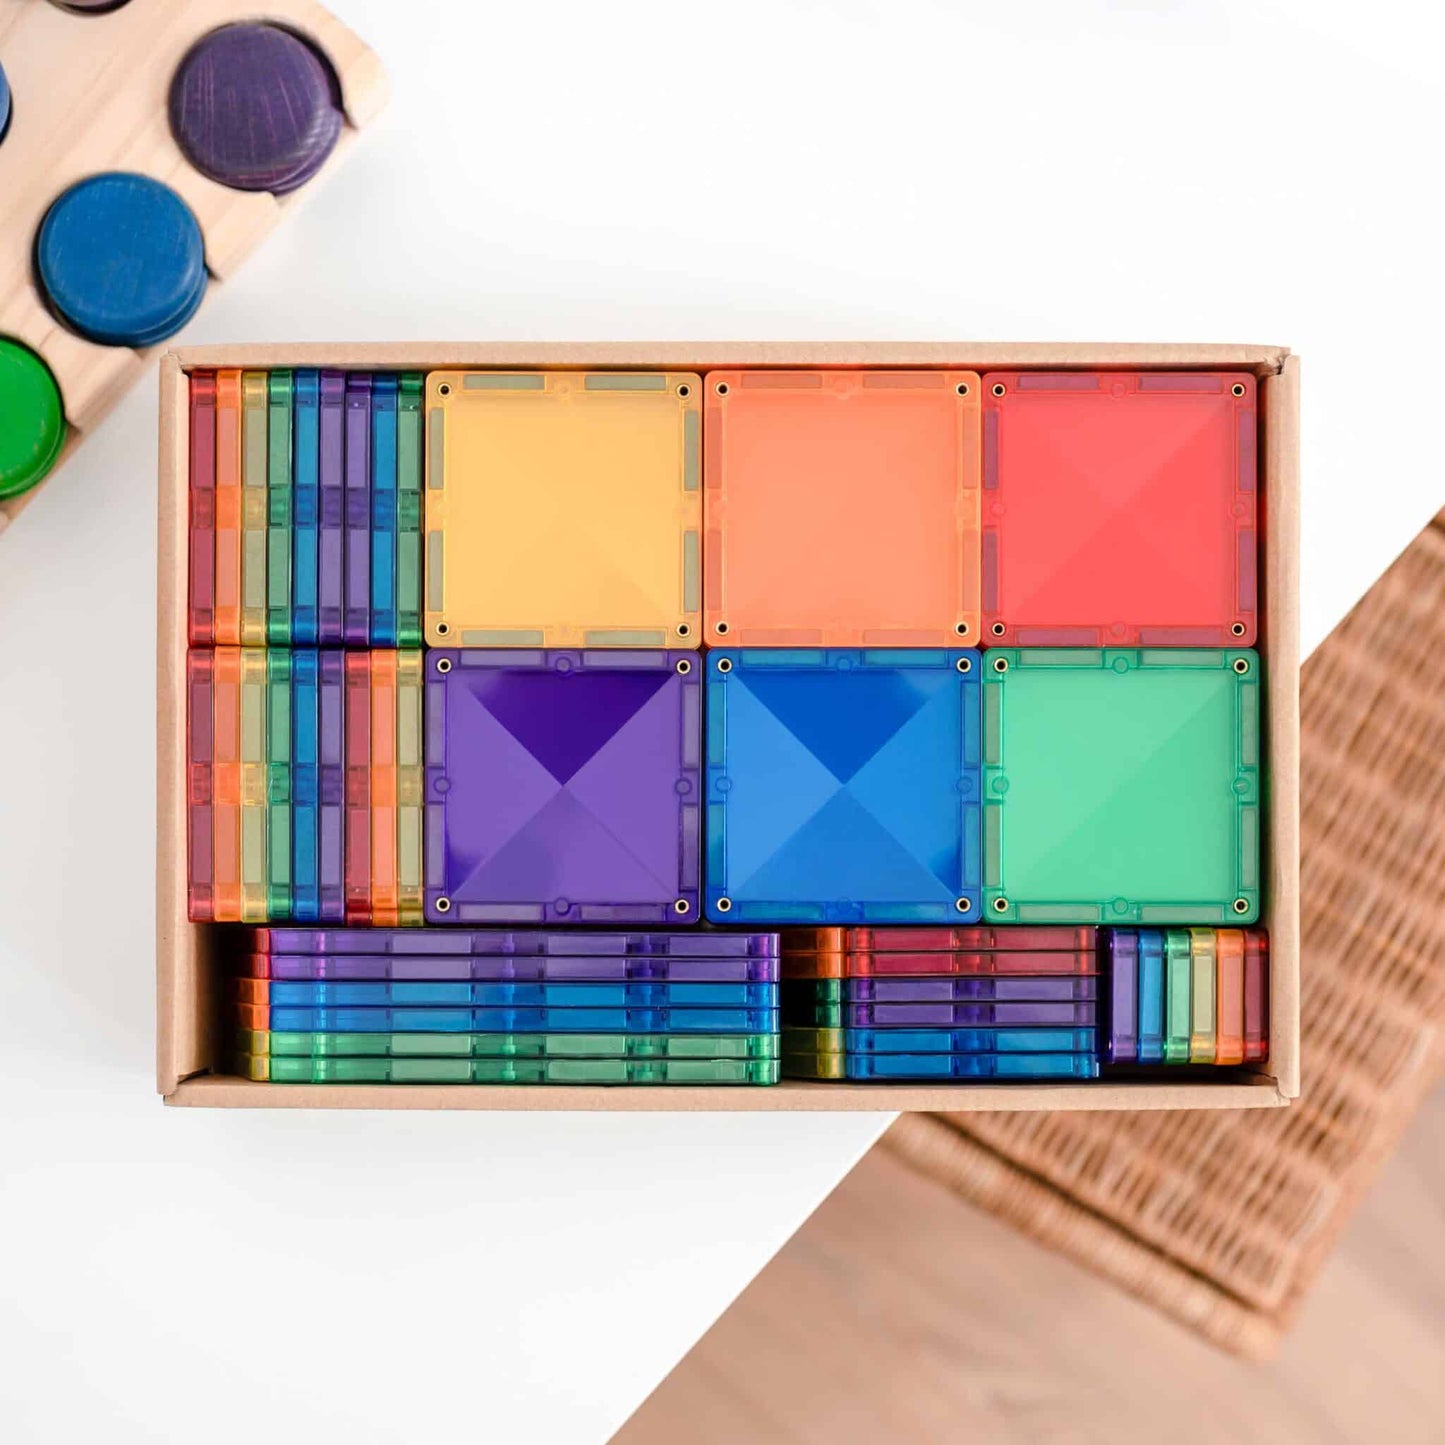 [Connetix Tiles] 102 Piece Rainbow Creative Pack | Educational Magnetic Tiles Learning Toy